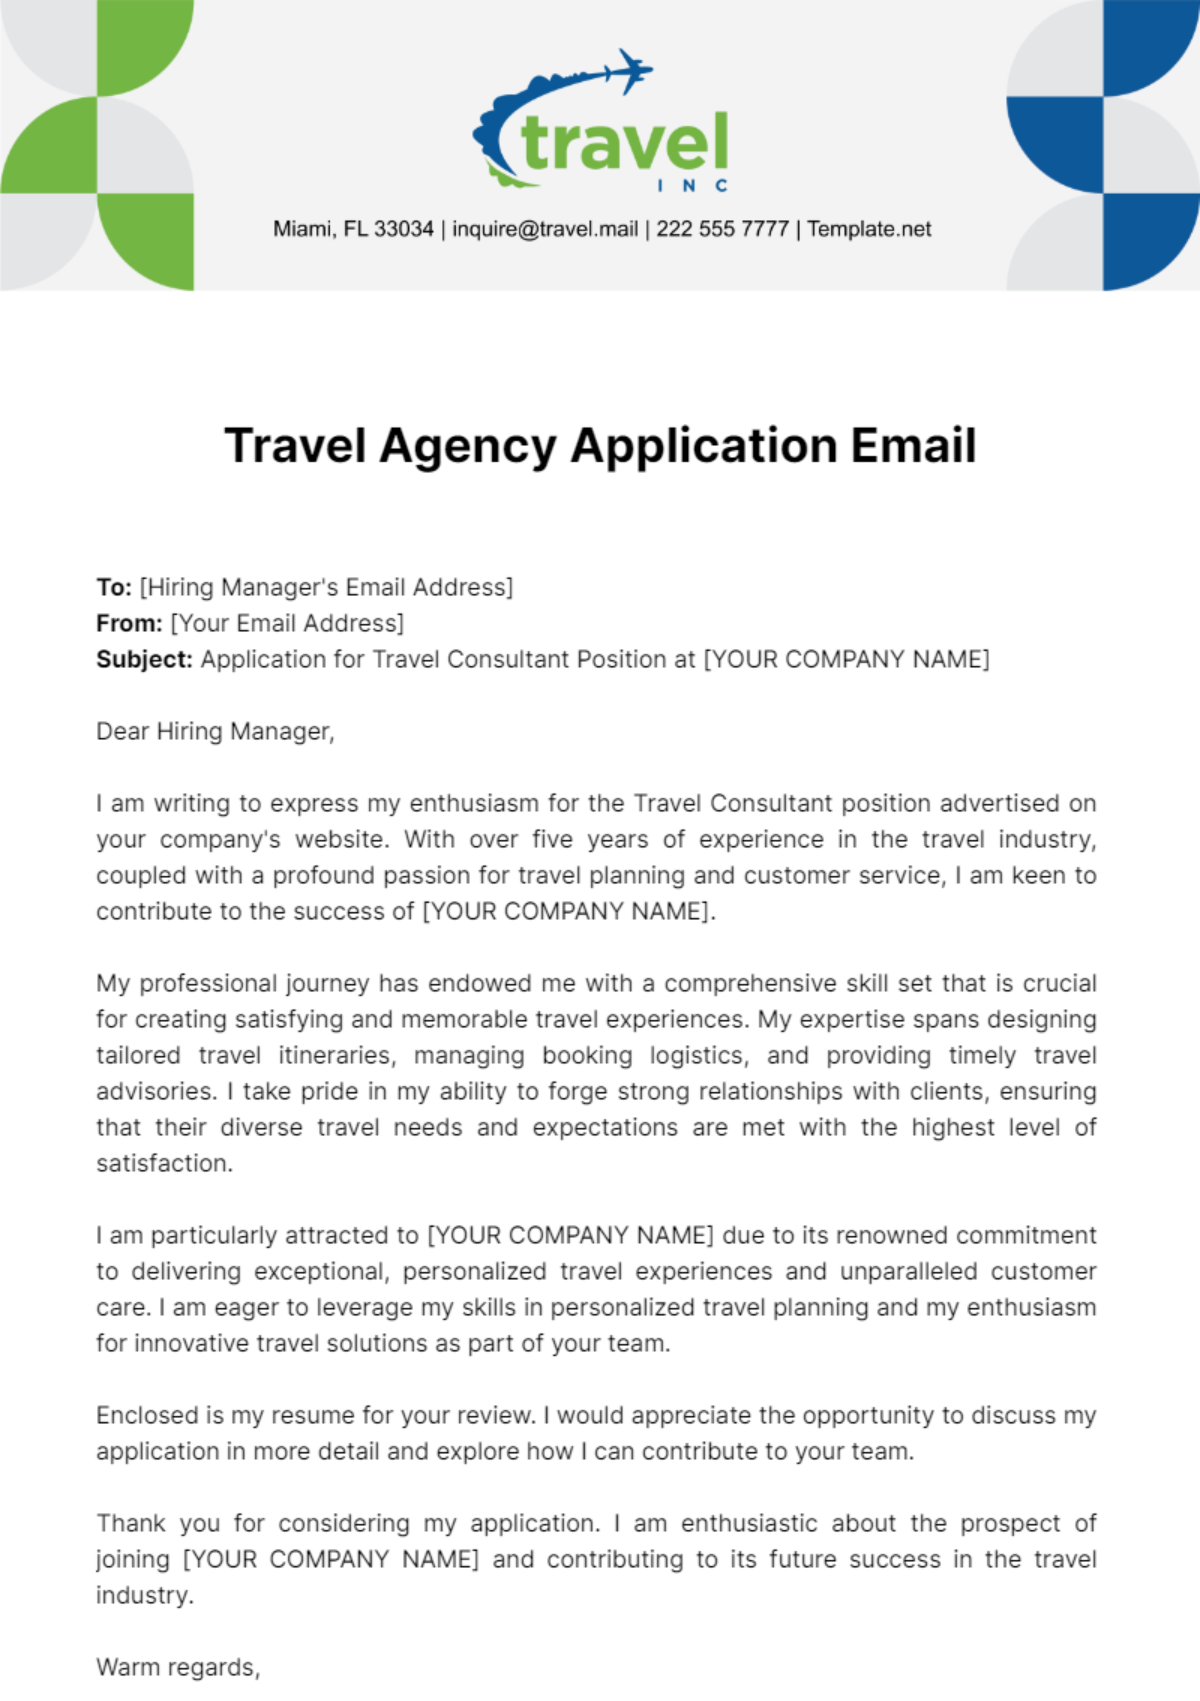 Free Travel Agency Application Email Template